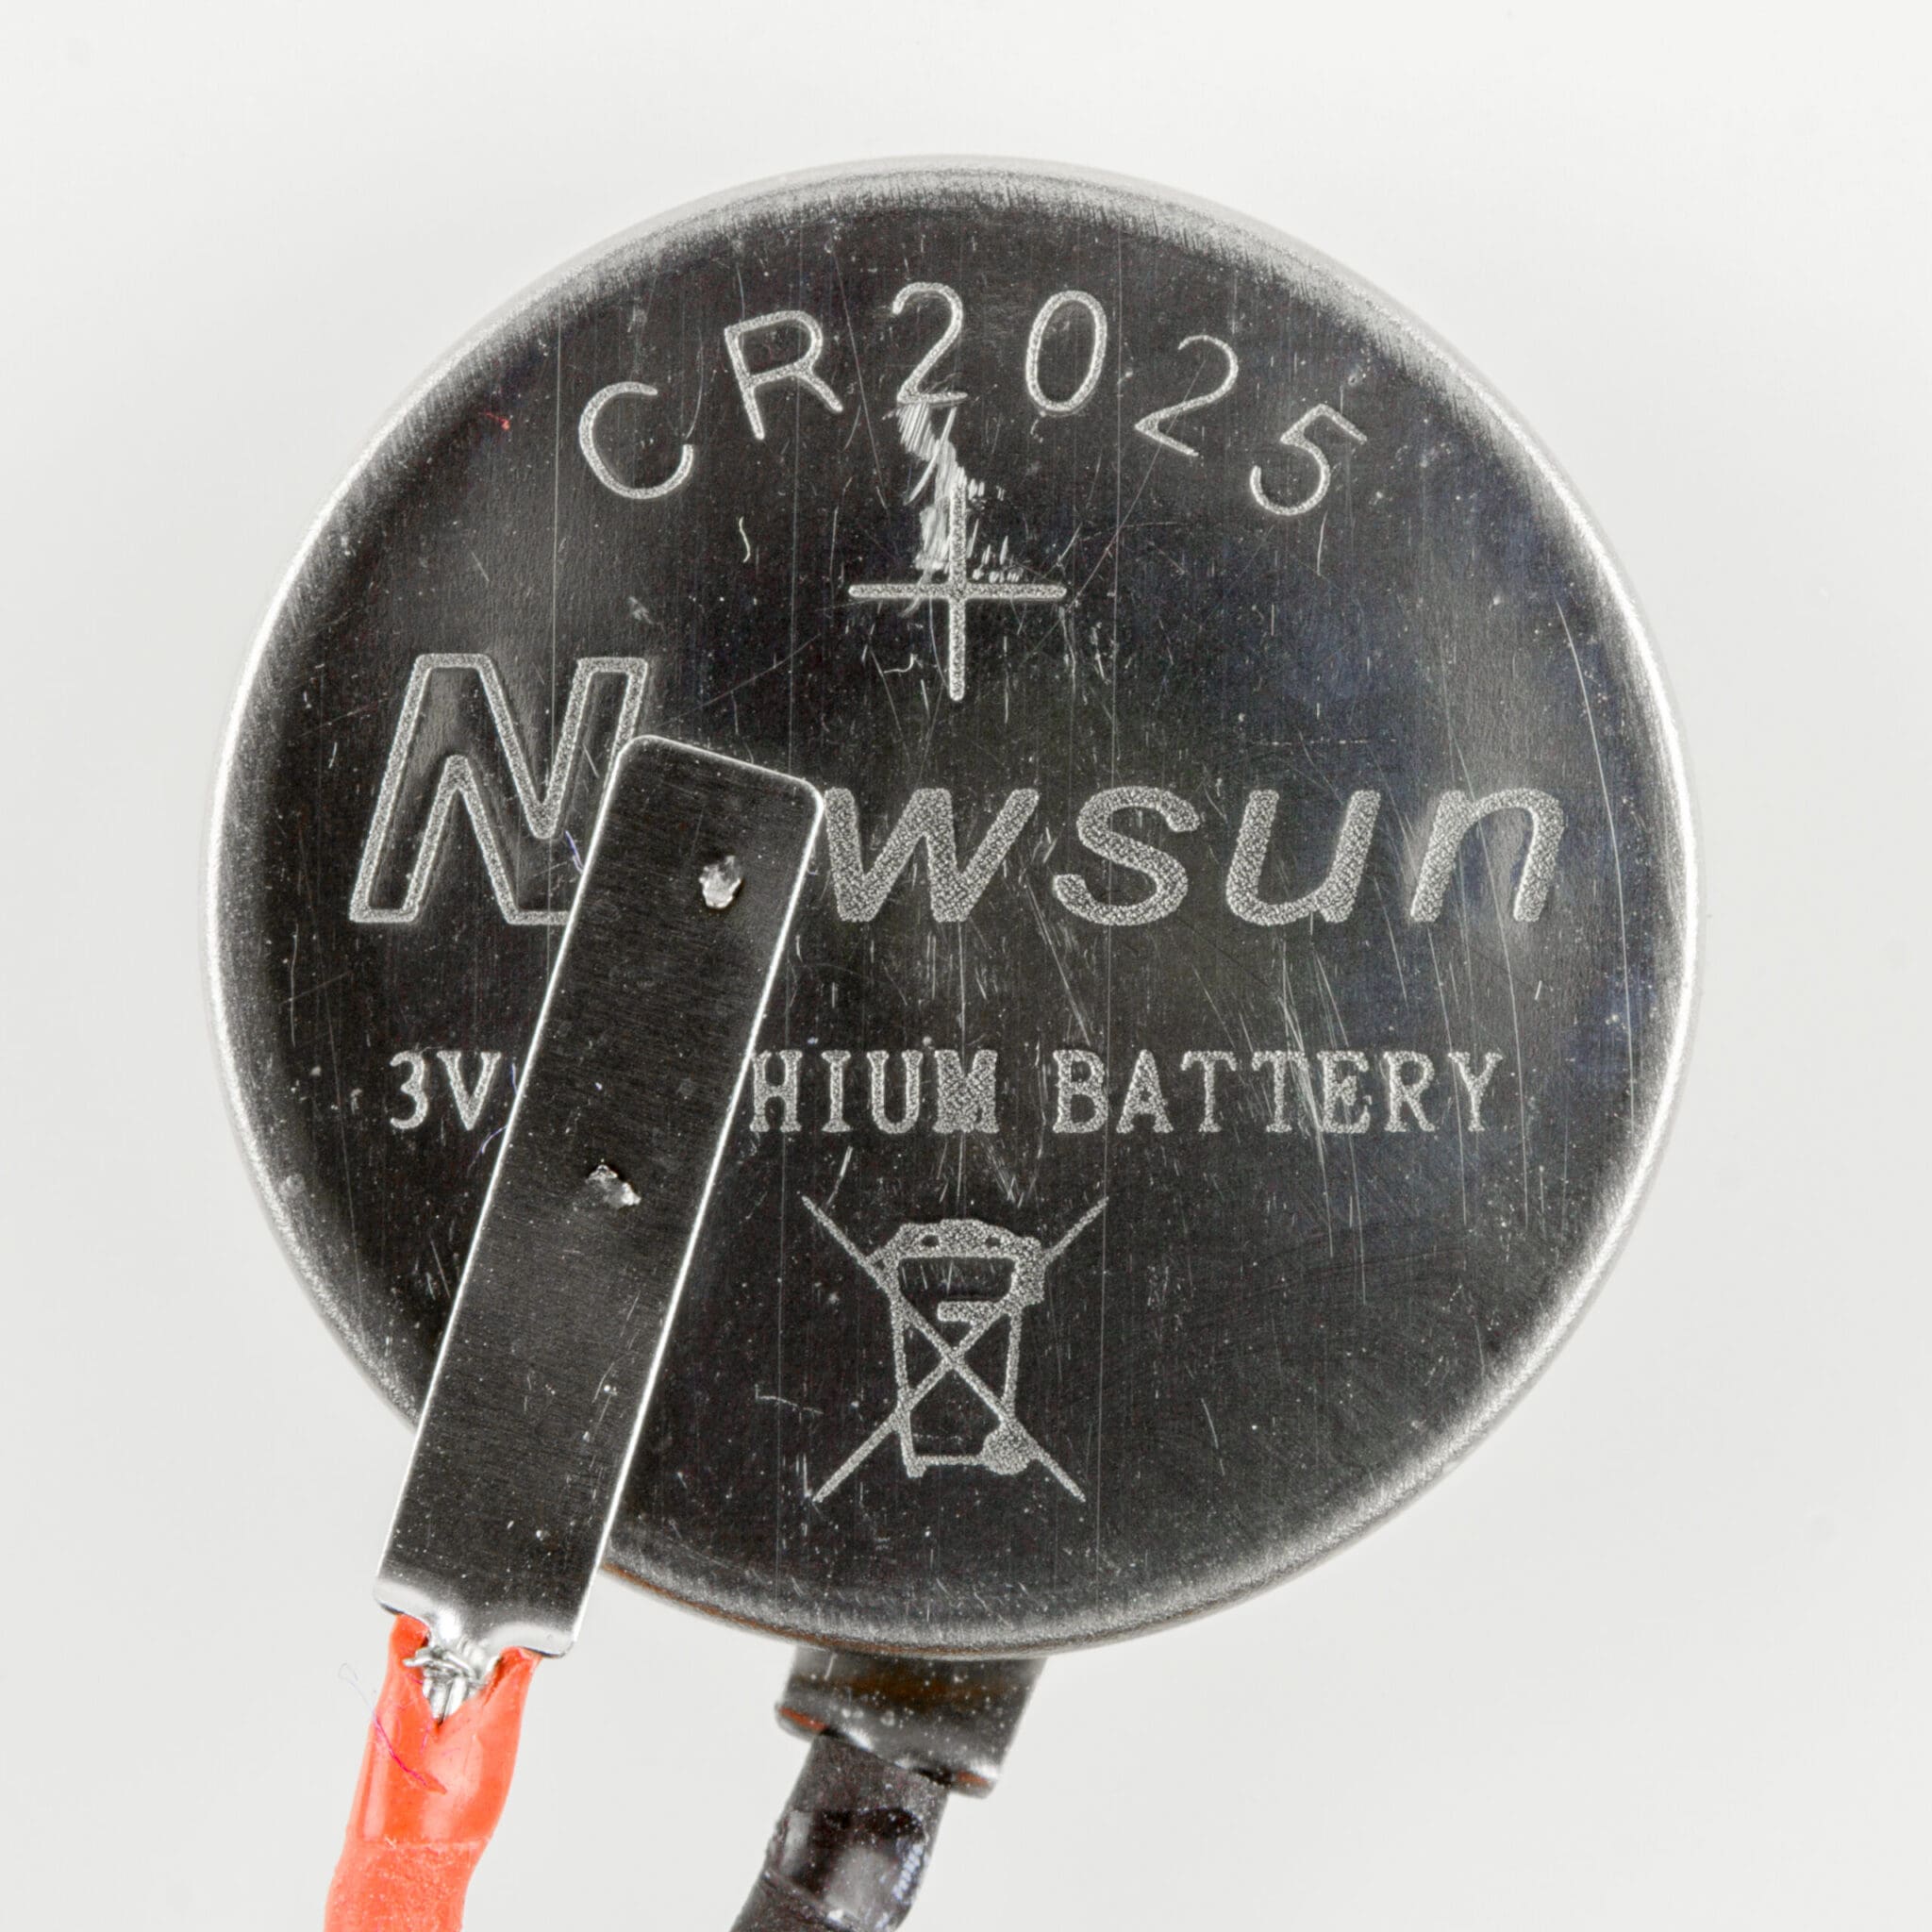 cr2025 battery scaled